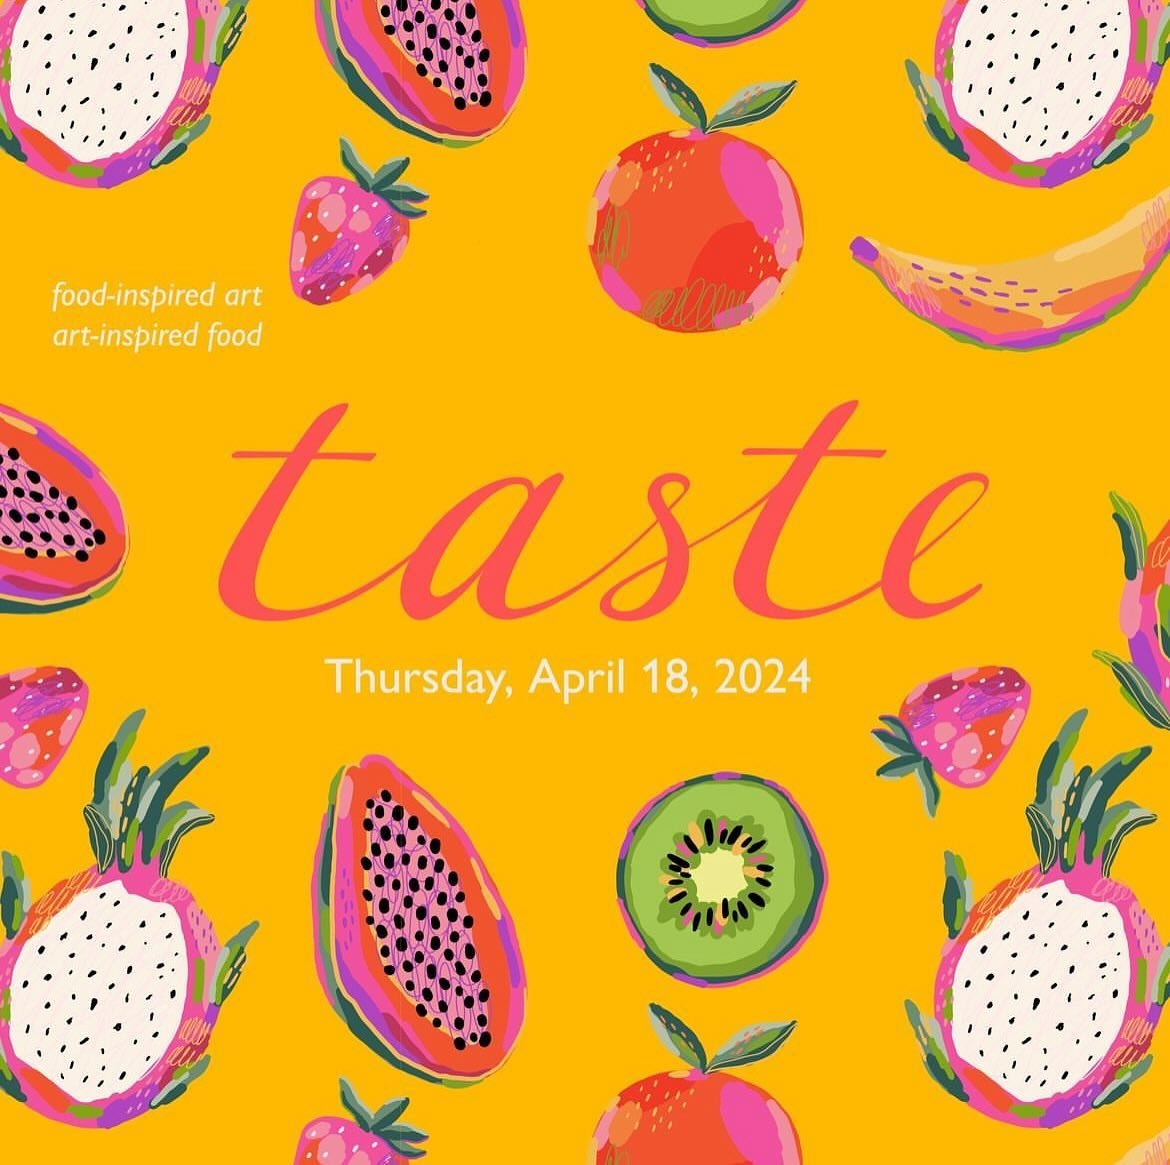 Market Street Arts is thrilled to participate in TASTE 2024 at @rootdivision. Tickets still available for TOMORROW NIGHT April 18 at 7:30p! 

@marketstreetarts is proud to support this delicious event as over a dozen local chefs and bartenders showca